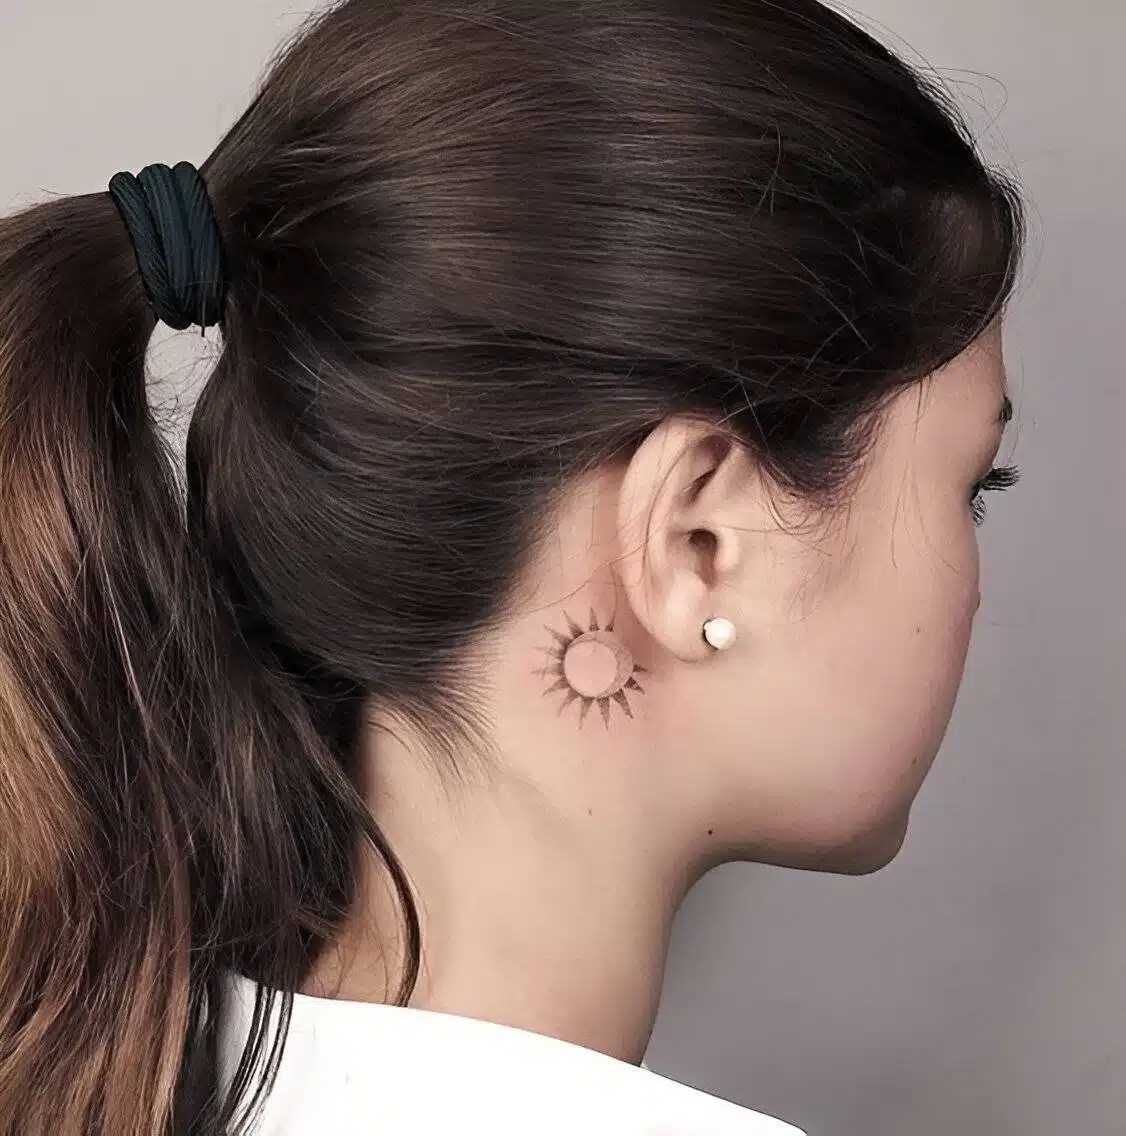 25 Low-key Stunning Behind The Ear Tattoos To Get ASAP - 173